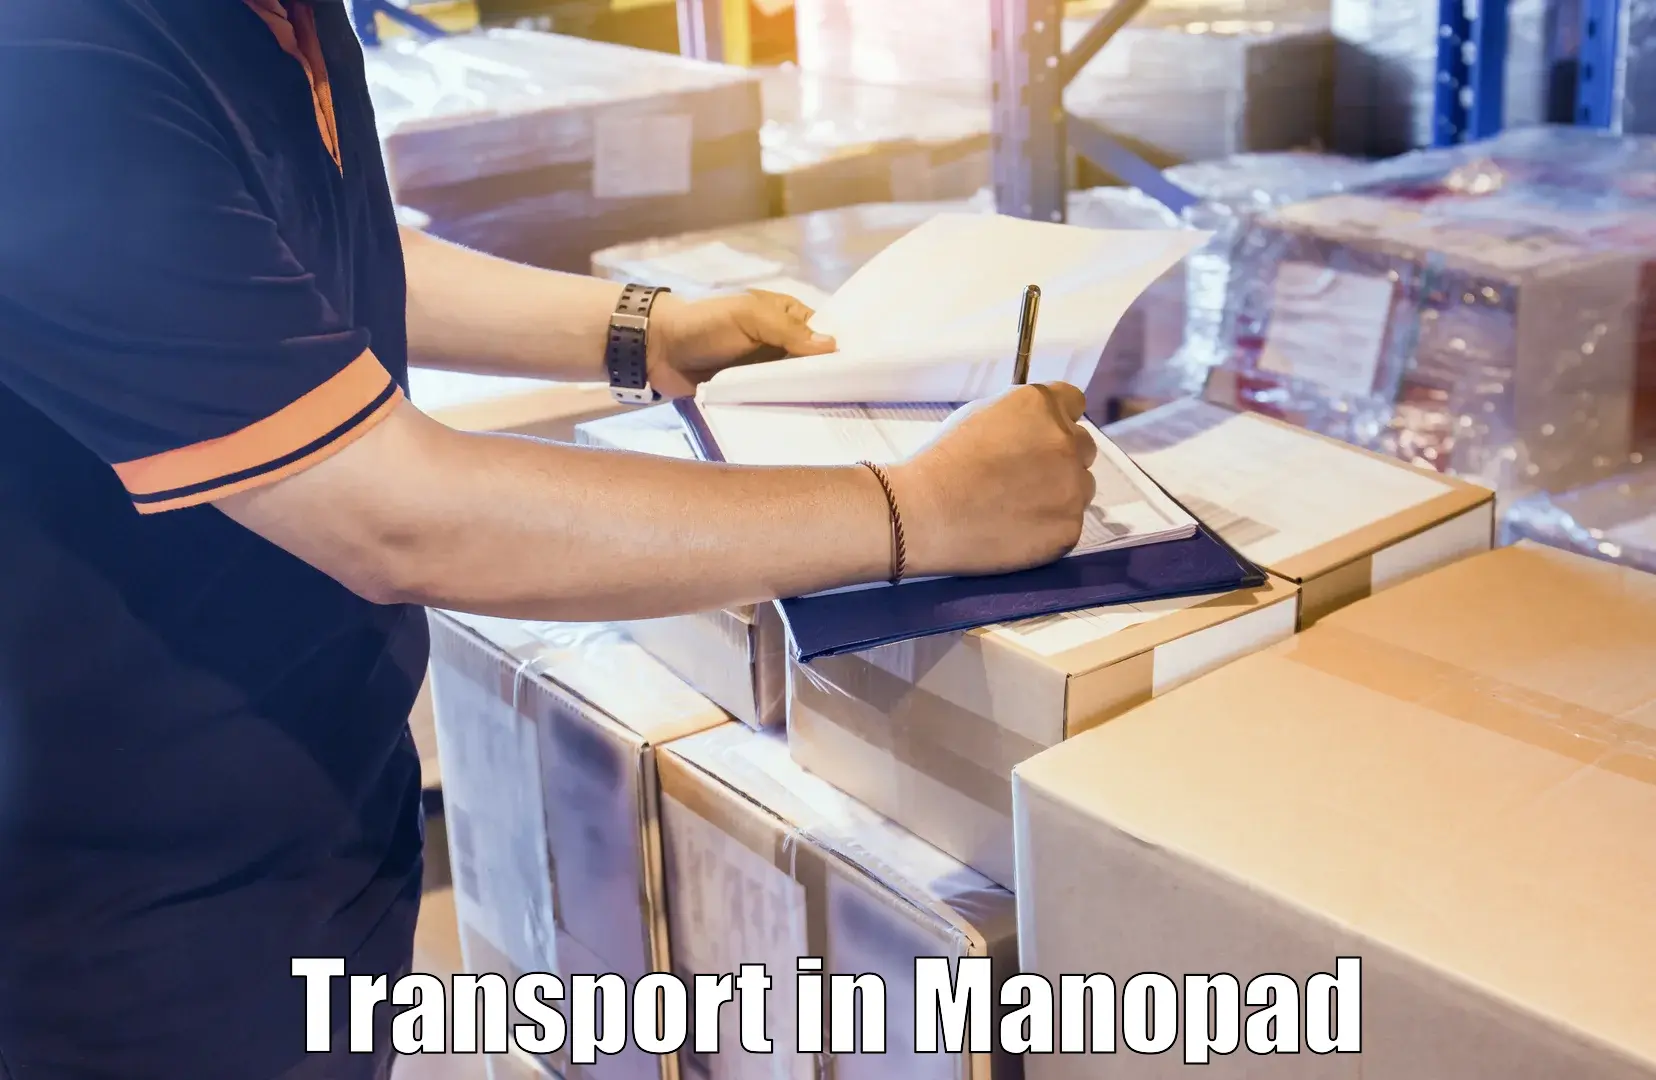 Road transport online services in Manopad